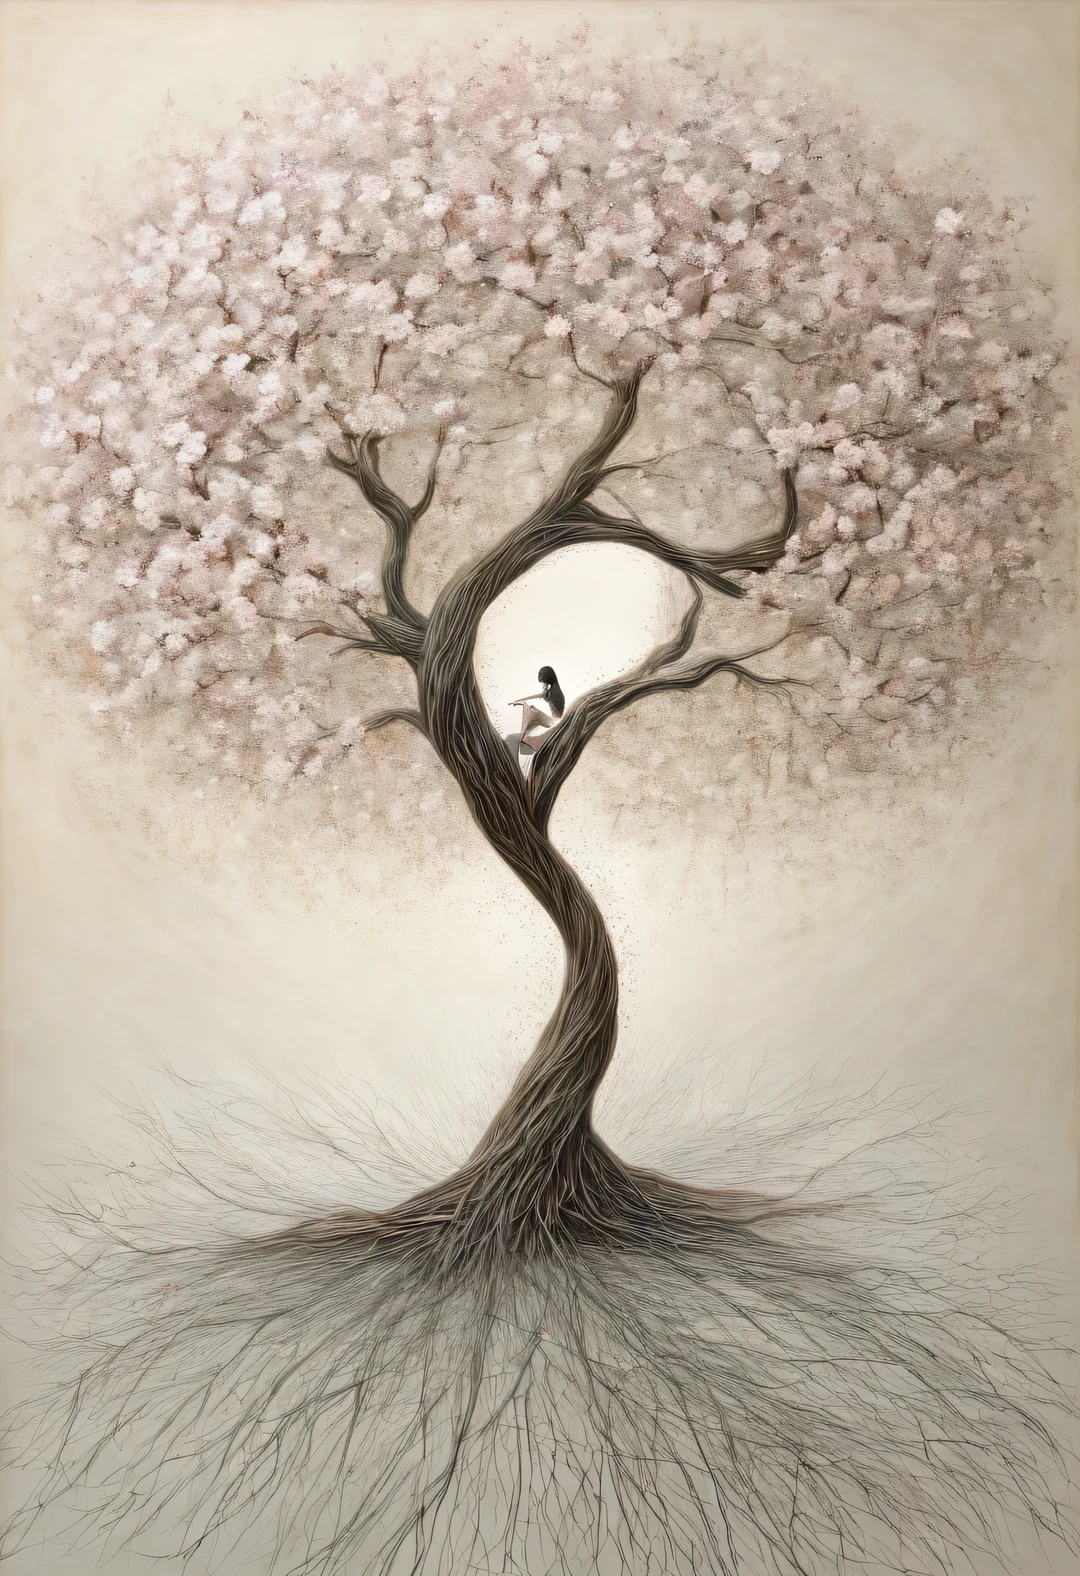 modern Art, Vanguard, surrealism, connecting the incongruous, a blooming sakura tree intricately intertwines its branches and forms a distinct image (Sakura Girl:1.3050), very beautiful picture, combining various drawing techniques, Ultra-fine lines and crisp details create the illusion of a three-dimensional image, and the play of light and shadow creates a feeling of living space in the picture, lighting from different sides creates additional illusions, shadows create the illusion of a double image, the interweaving of fine lines creates unimaginable depth and a feeling of endless space, made in oil and acrylic in combination with pastel and graphite., drawing on rough crumpled craft paper, Do it, Bridget Bate Tichenor, Gertrude Abercrombie, Joan Miro, Masterpiece, Master&#39;s work, worthy of an award